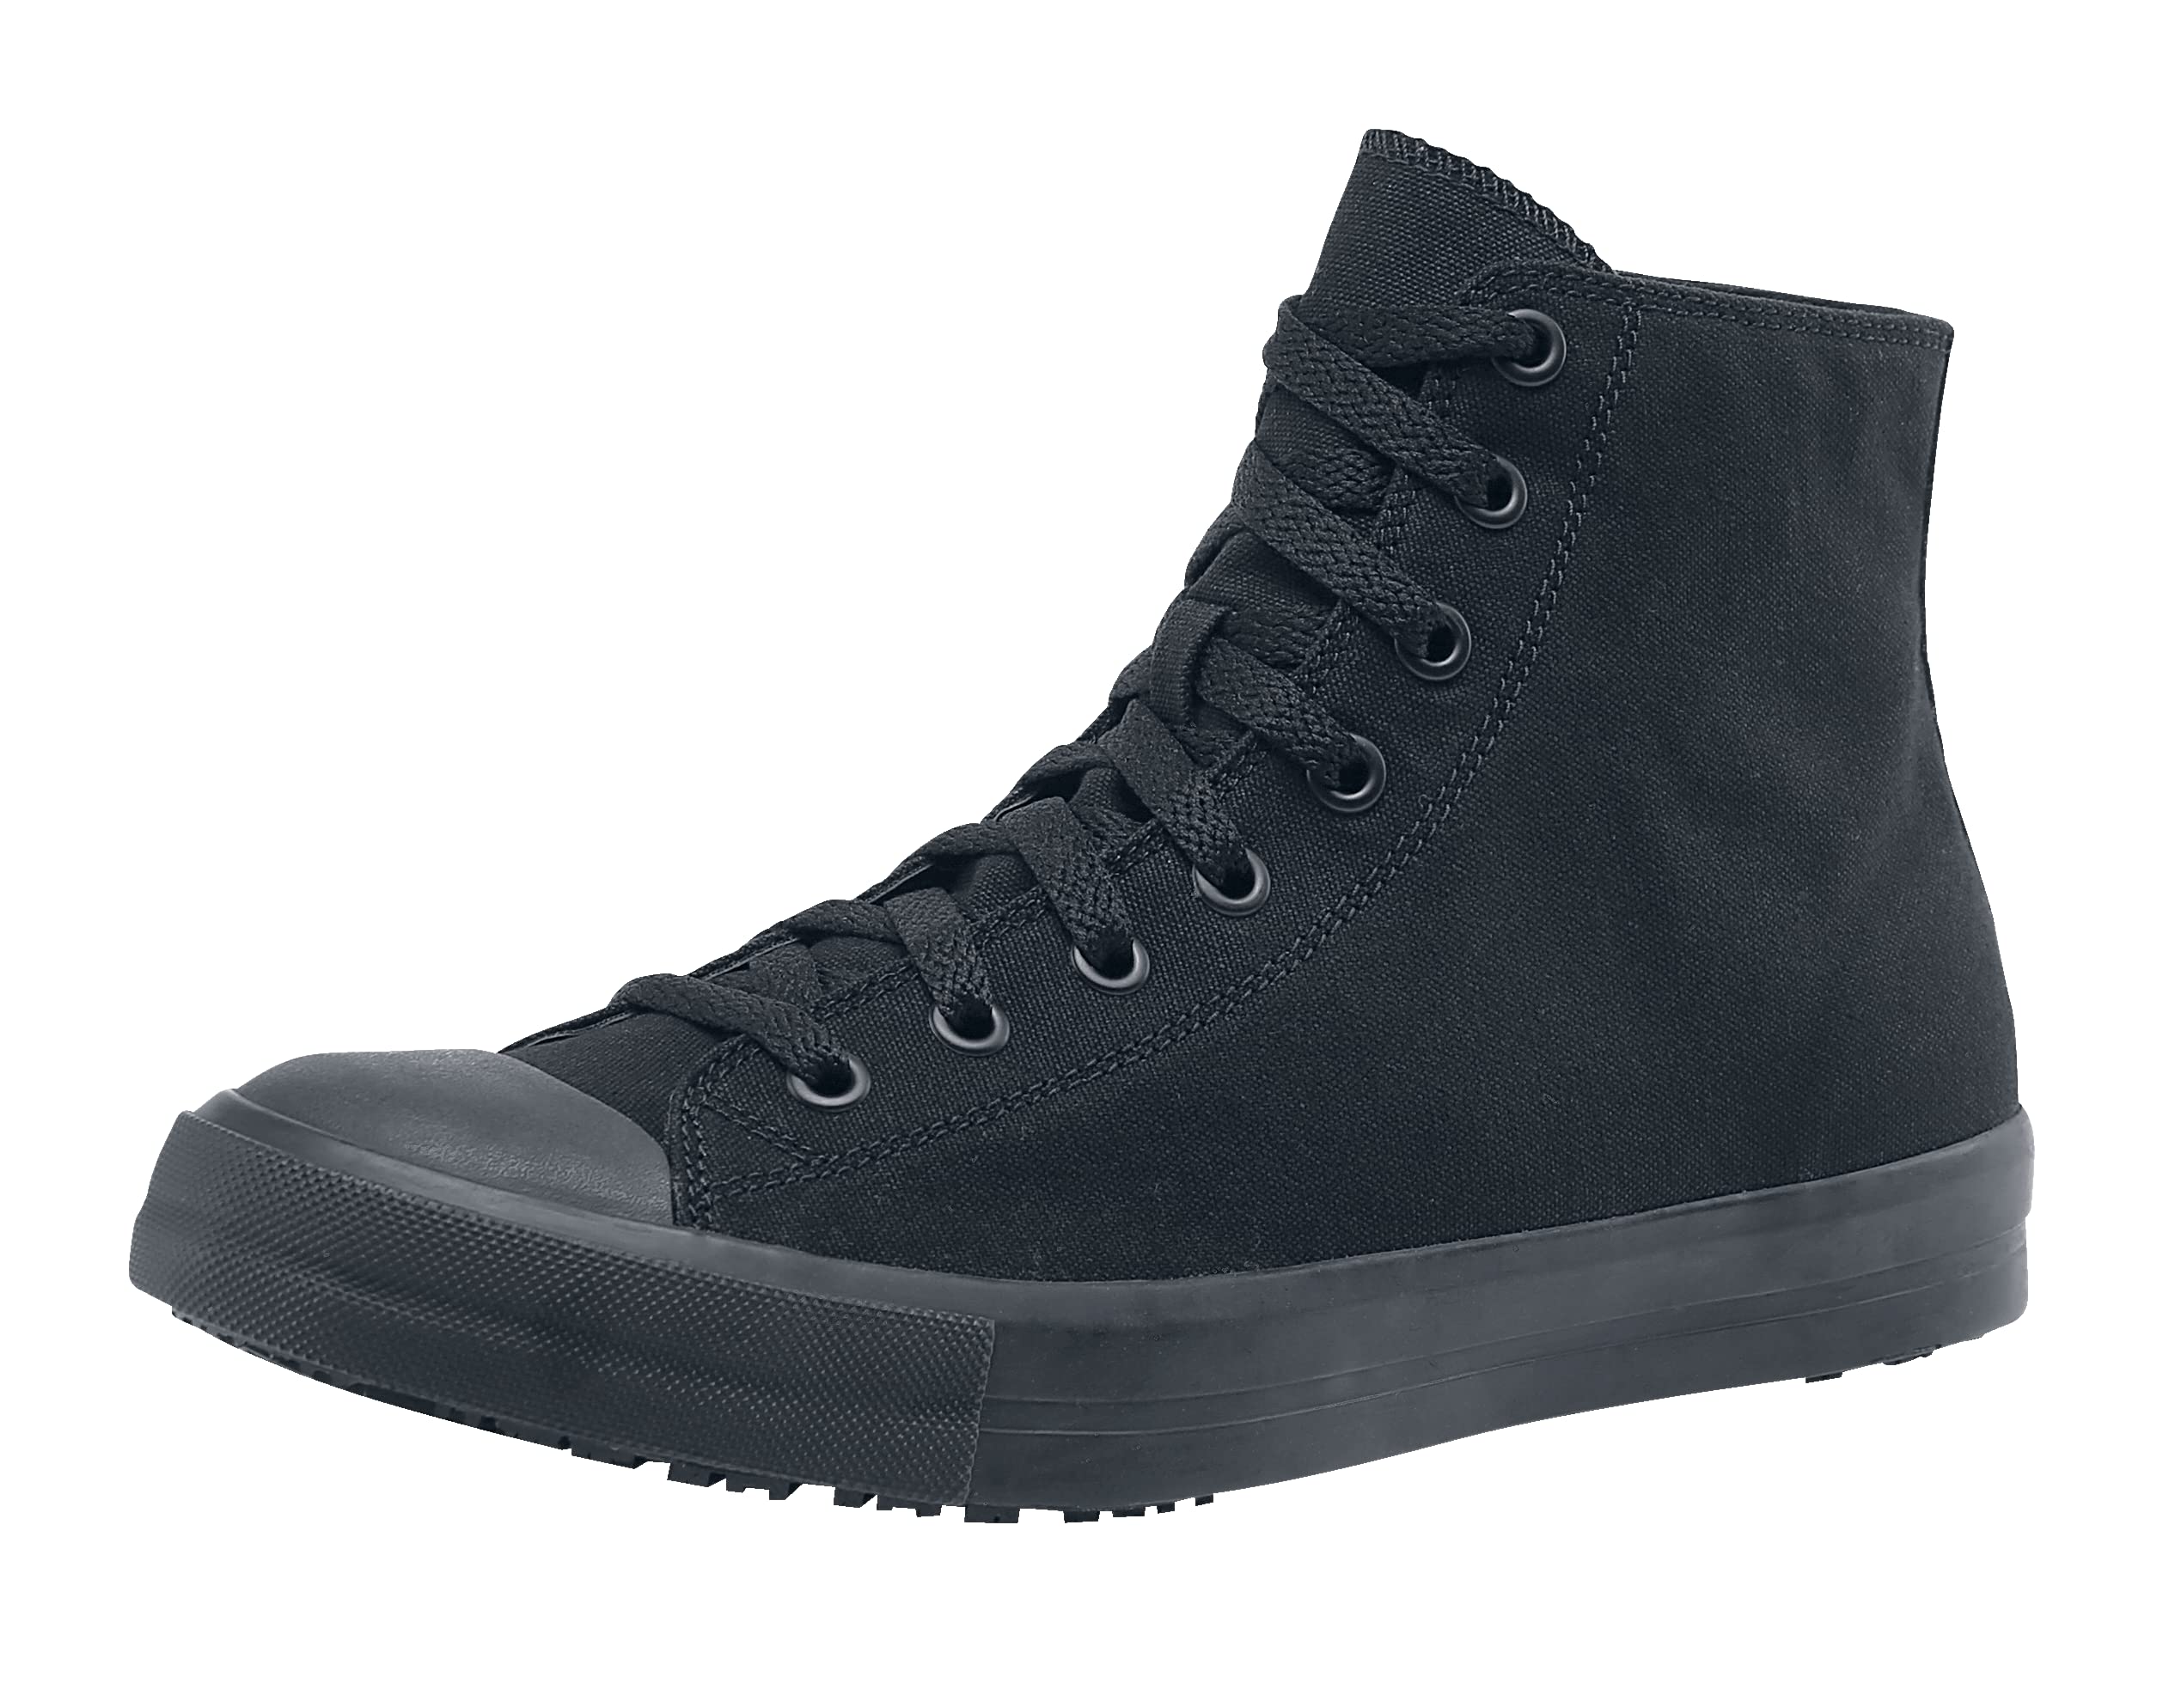 Shoes for Crews Pembroke, Men's Women's,Unisex, Slip Resistant, High Top Work Sneakers, Leather or Canvas